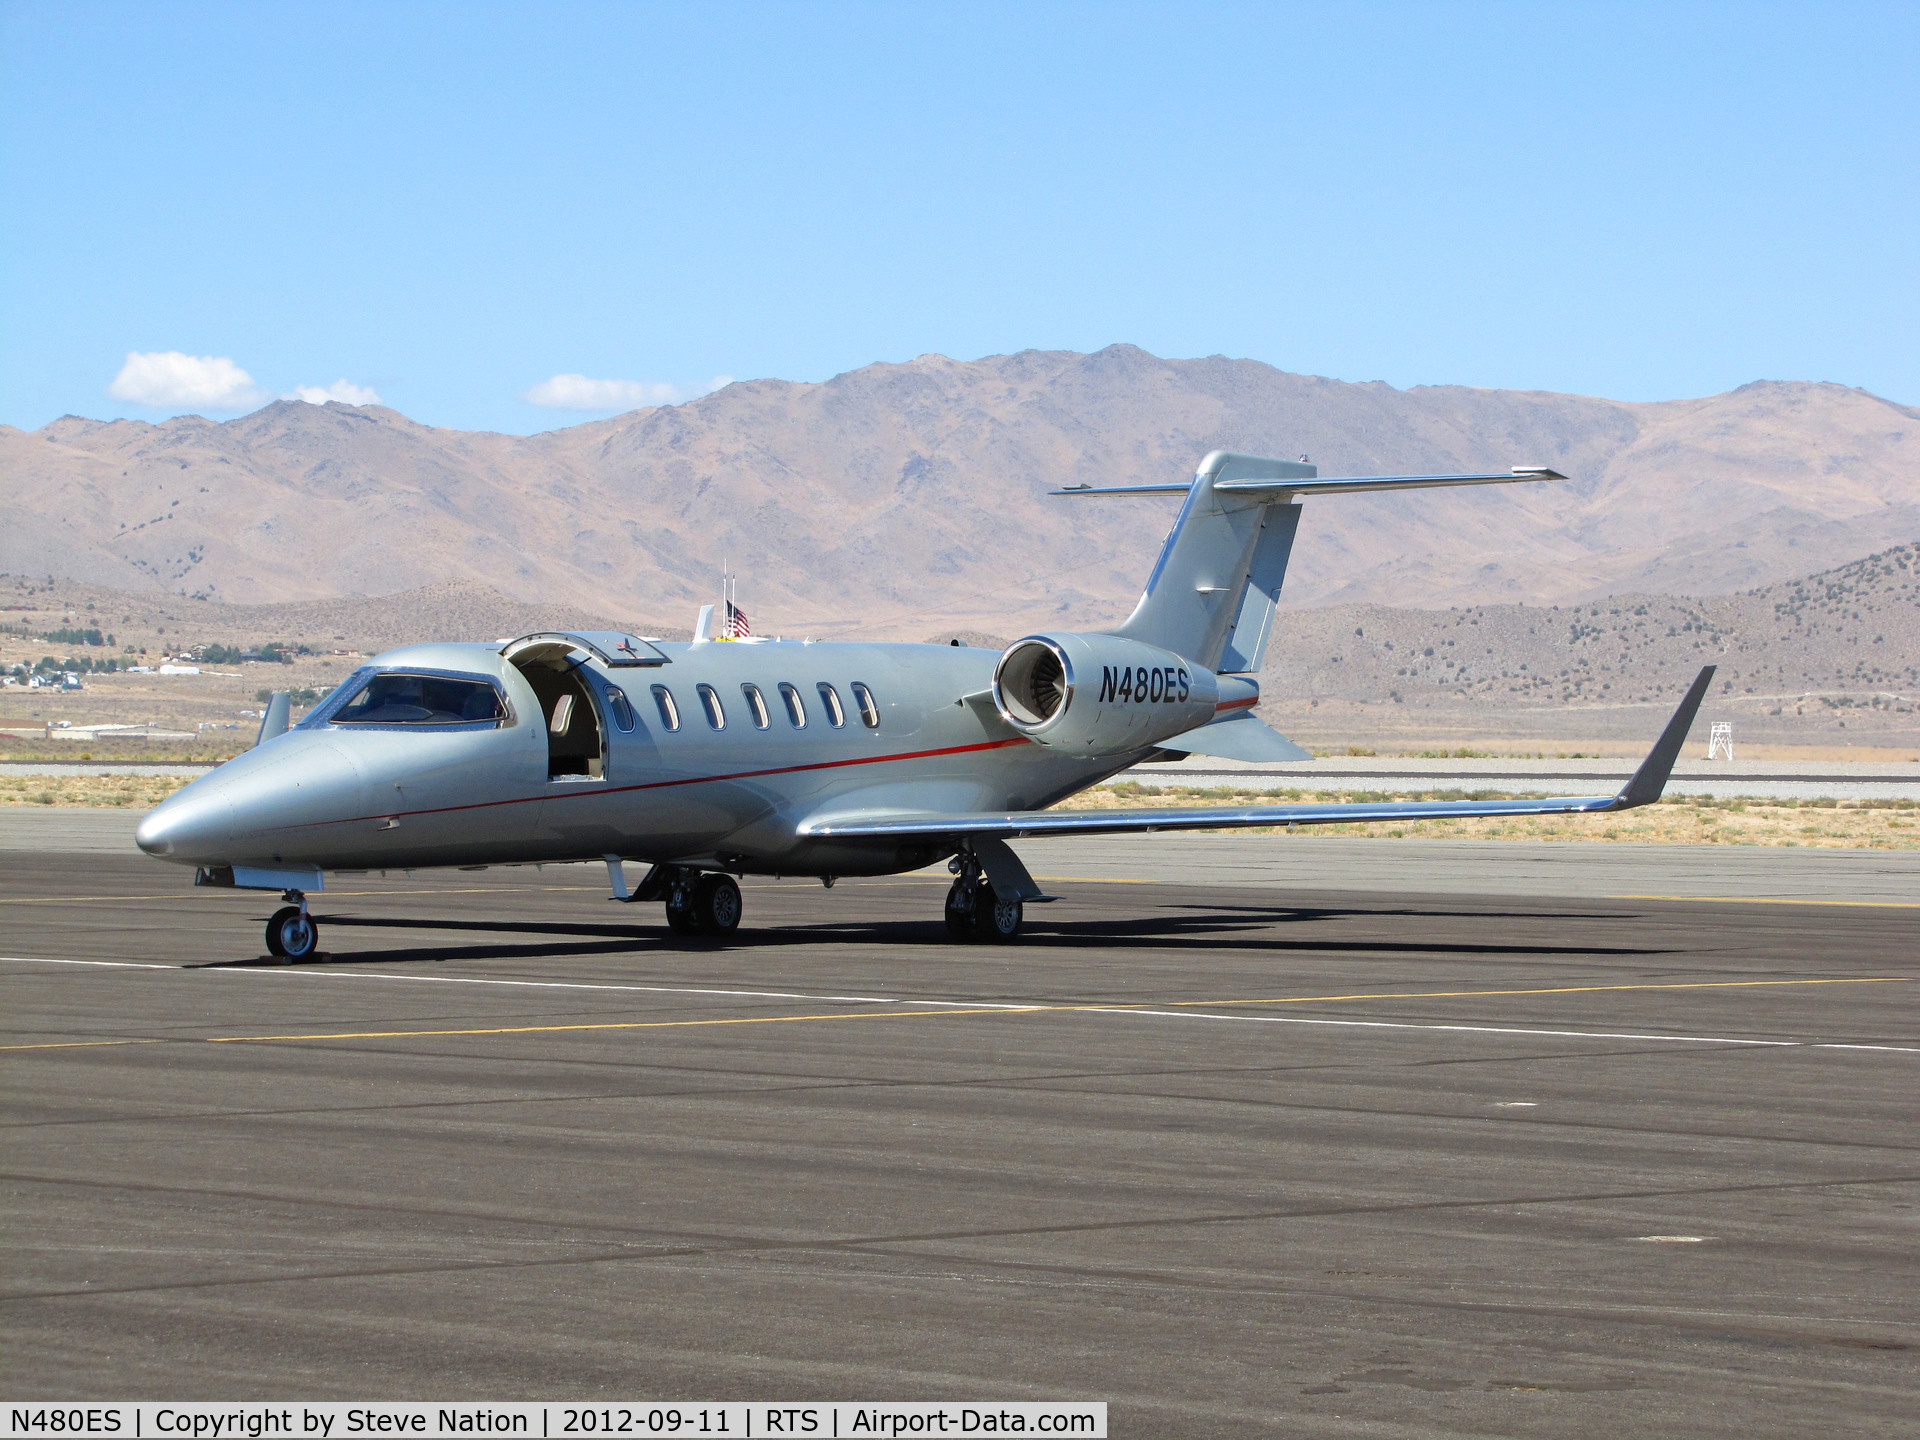 N480ES, Learjet 45 C/N 2097, Bombardier Aerospace Learjet 45 pace plane for Jet Class on the active ramp @ on September 11, 2012 at Stead Airport during Reno Air Races